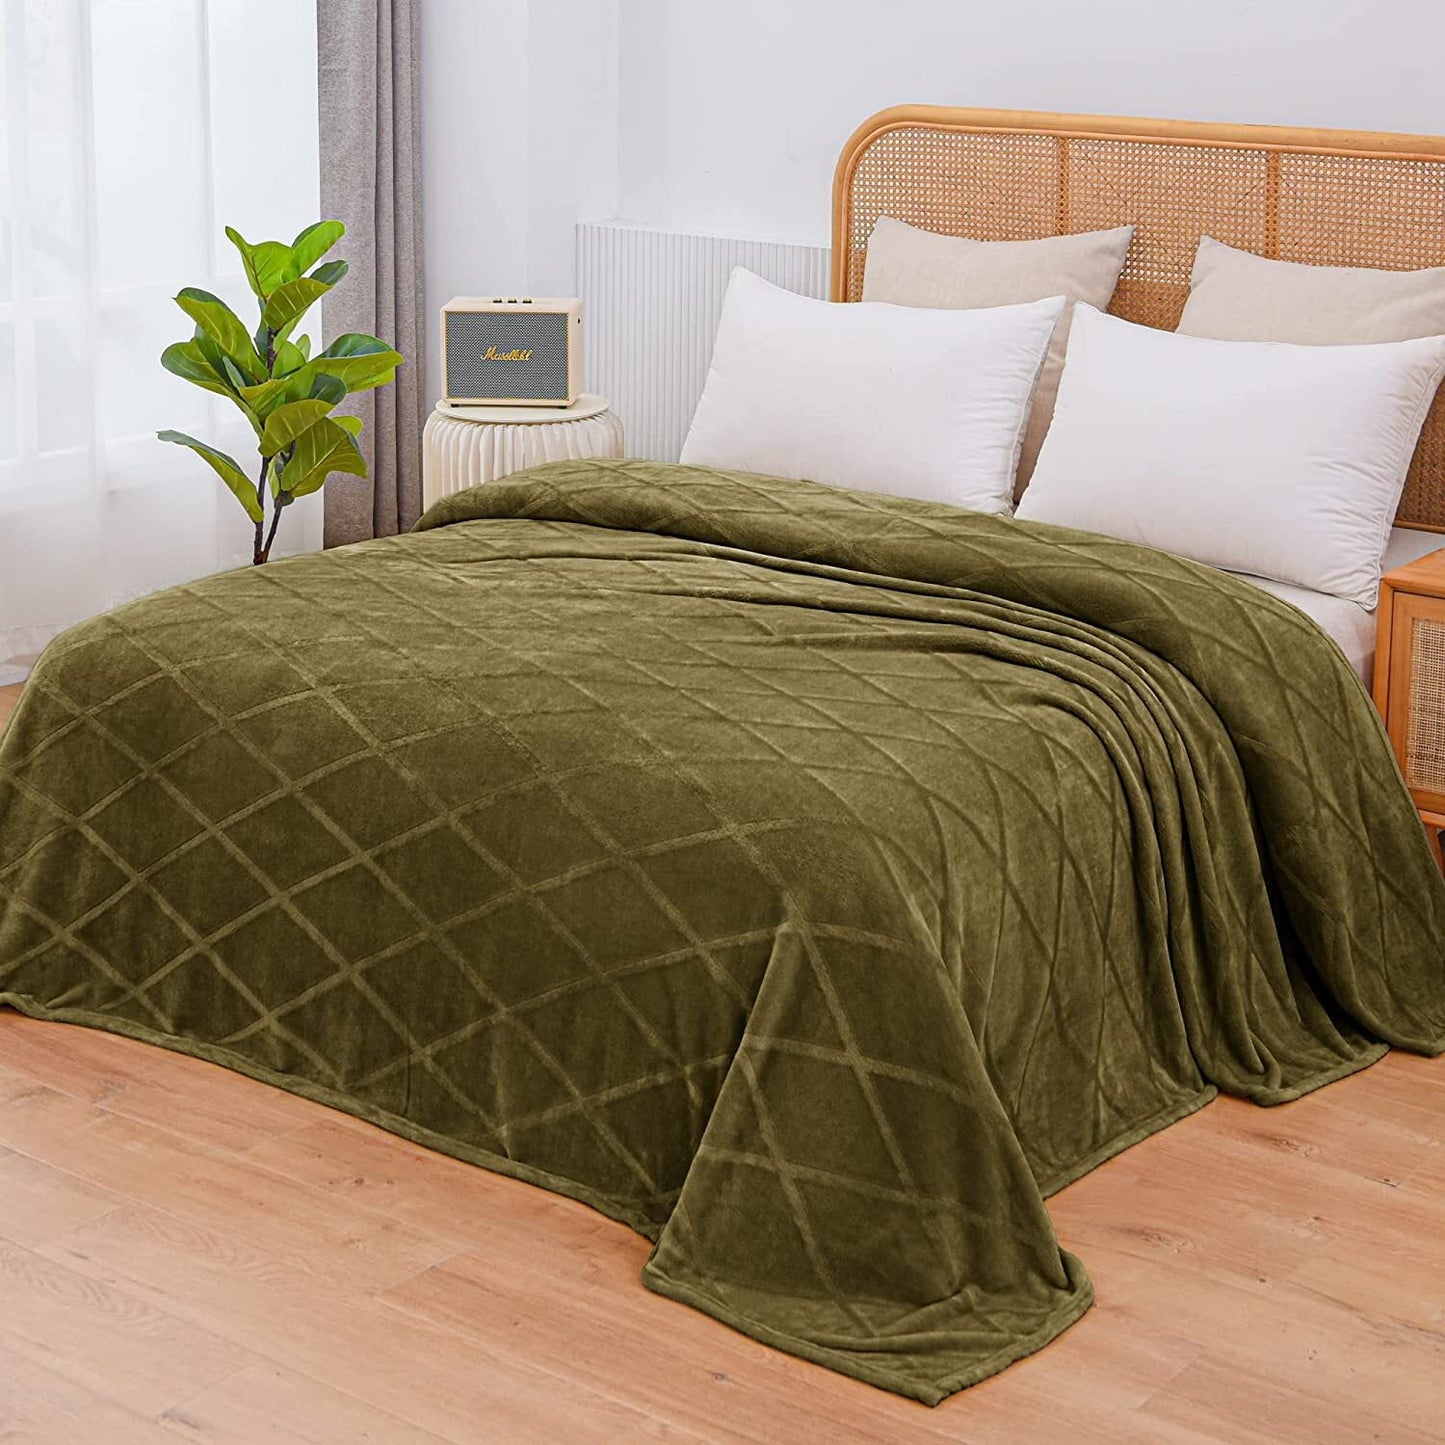 Exclusivo Mezcla Queen Size Flannel Fleece Blanket, 90x90 Inches Soft Diamond Geometry Pattern Velvet Plush Blanket for Bed, Cozy, Warm, Lightweight and Decorative Olive Green Blanket